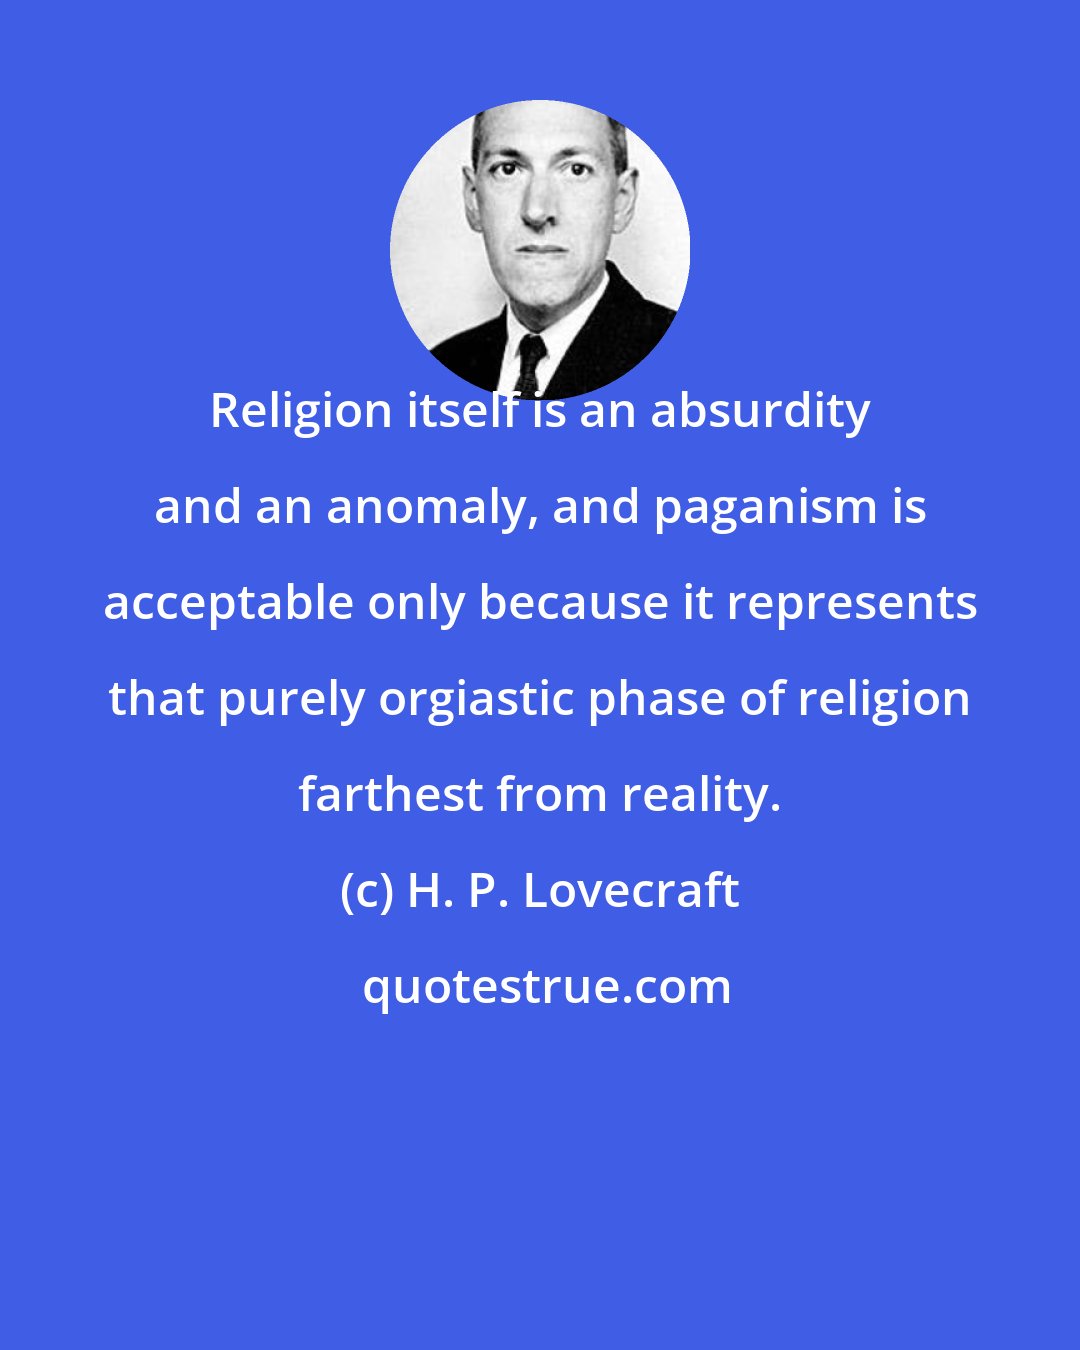 H. P. Lovecraft: Religion itself is an absurdity and an anomaly, and paganism is acceptable only because it represents that purely orgiastic phase of religion farthest from reality.